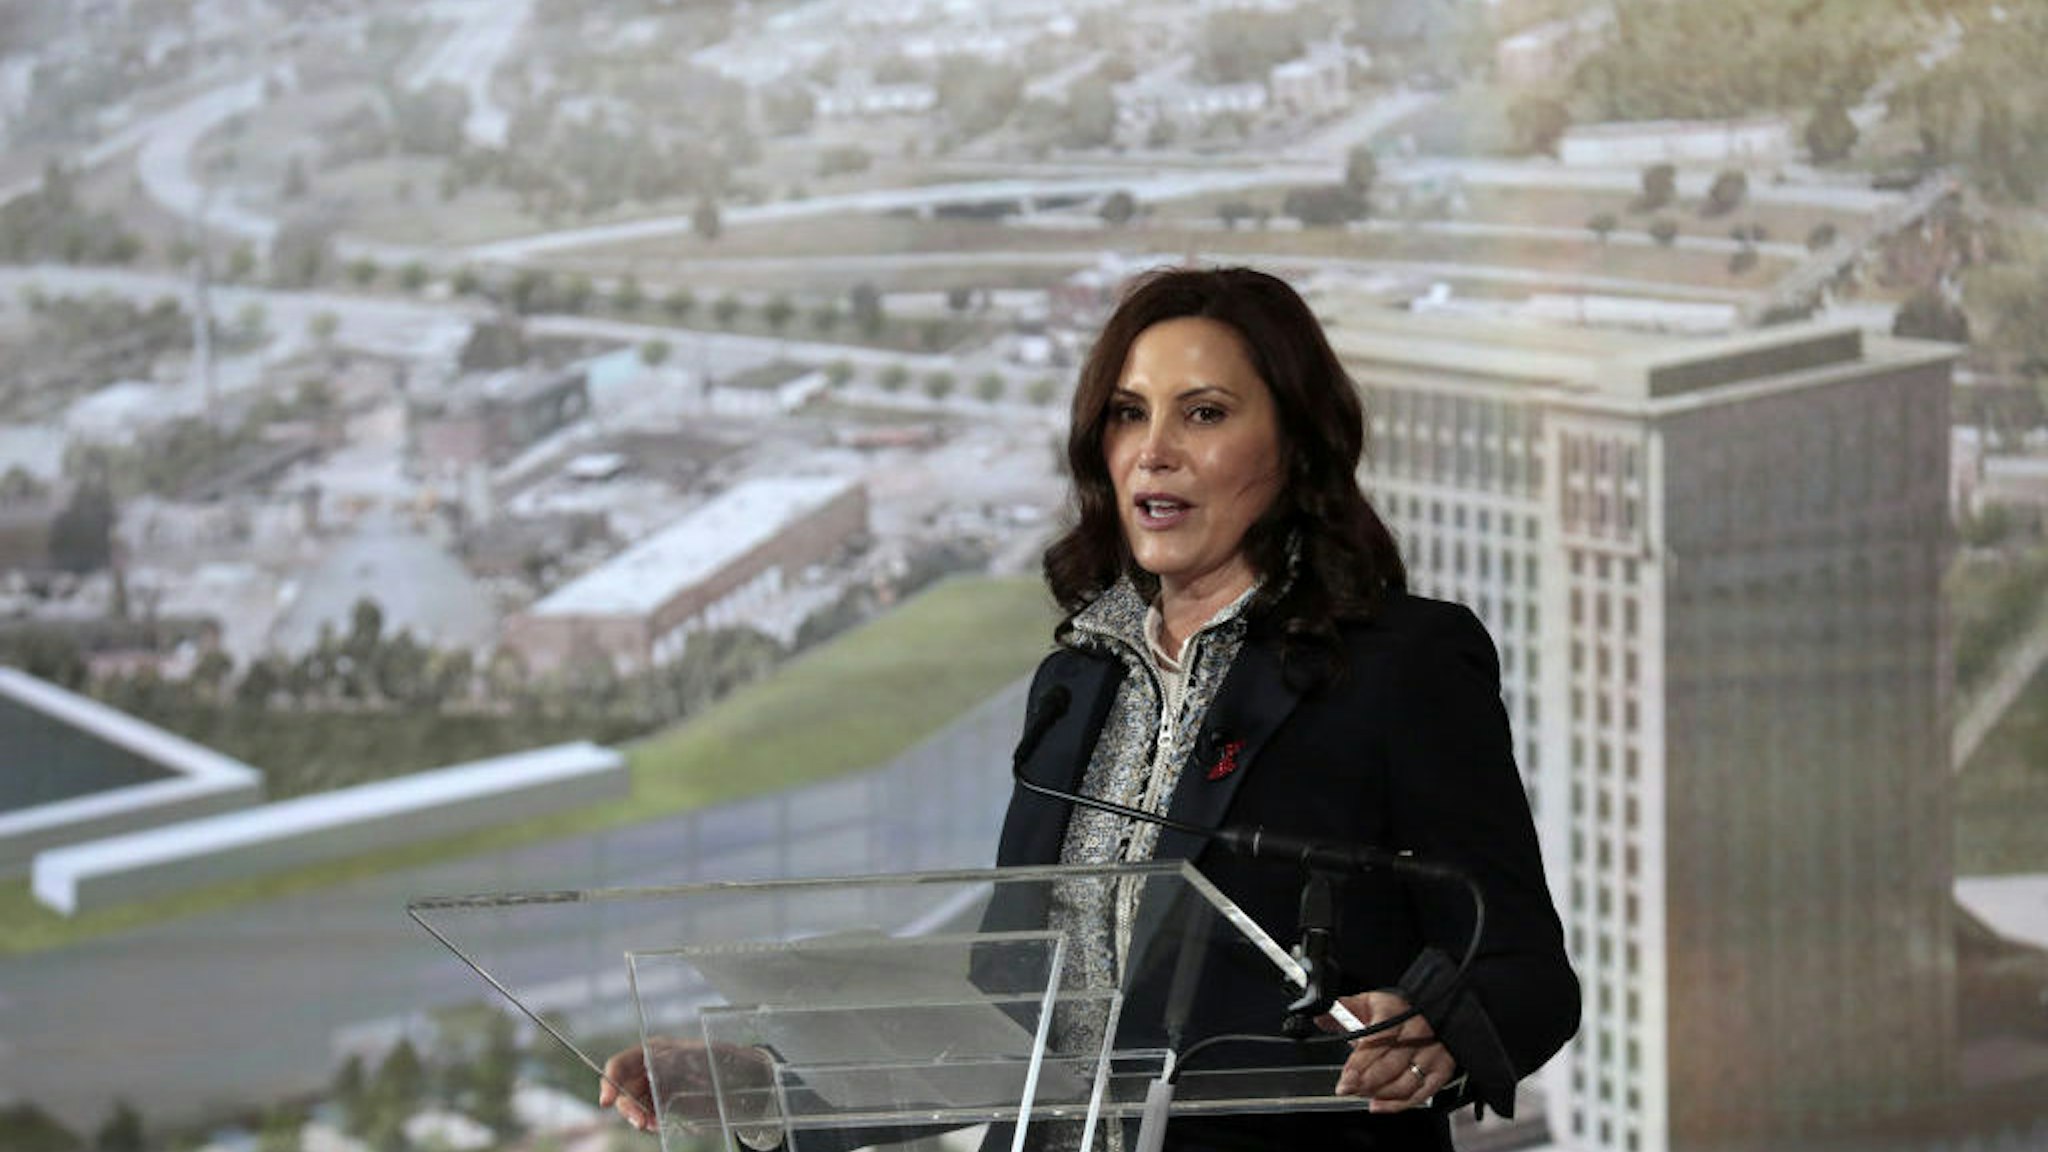 Gretchen Whitmer, governor of Michigan, speaks during a news conference at Michigan Central Station in Detroit, Michigan, U.S., on Friday, Feb. 4, 2022. Google is joining Ford as a Founding Member at Michigan Central, focusing its efforts on training and educating people in Detroit for high-tech jobs and collaborating to solve mobility problems challenging communities. Photographer: Jeff Kowalsky/Bloomberg